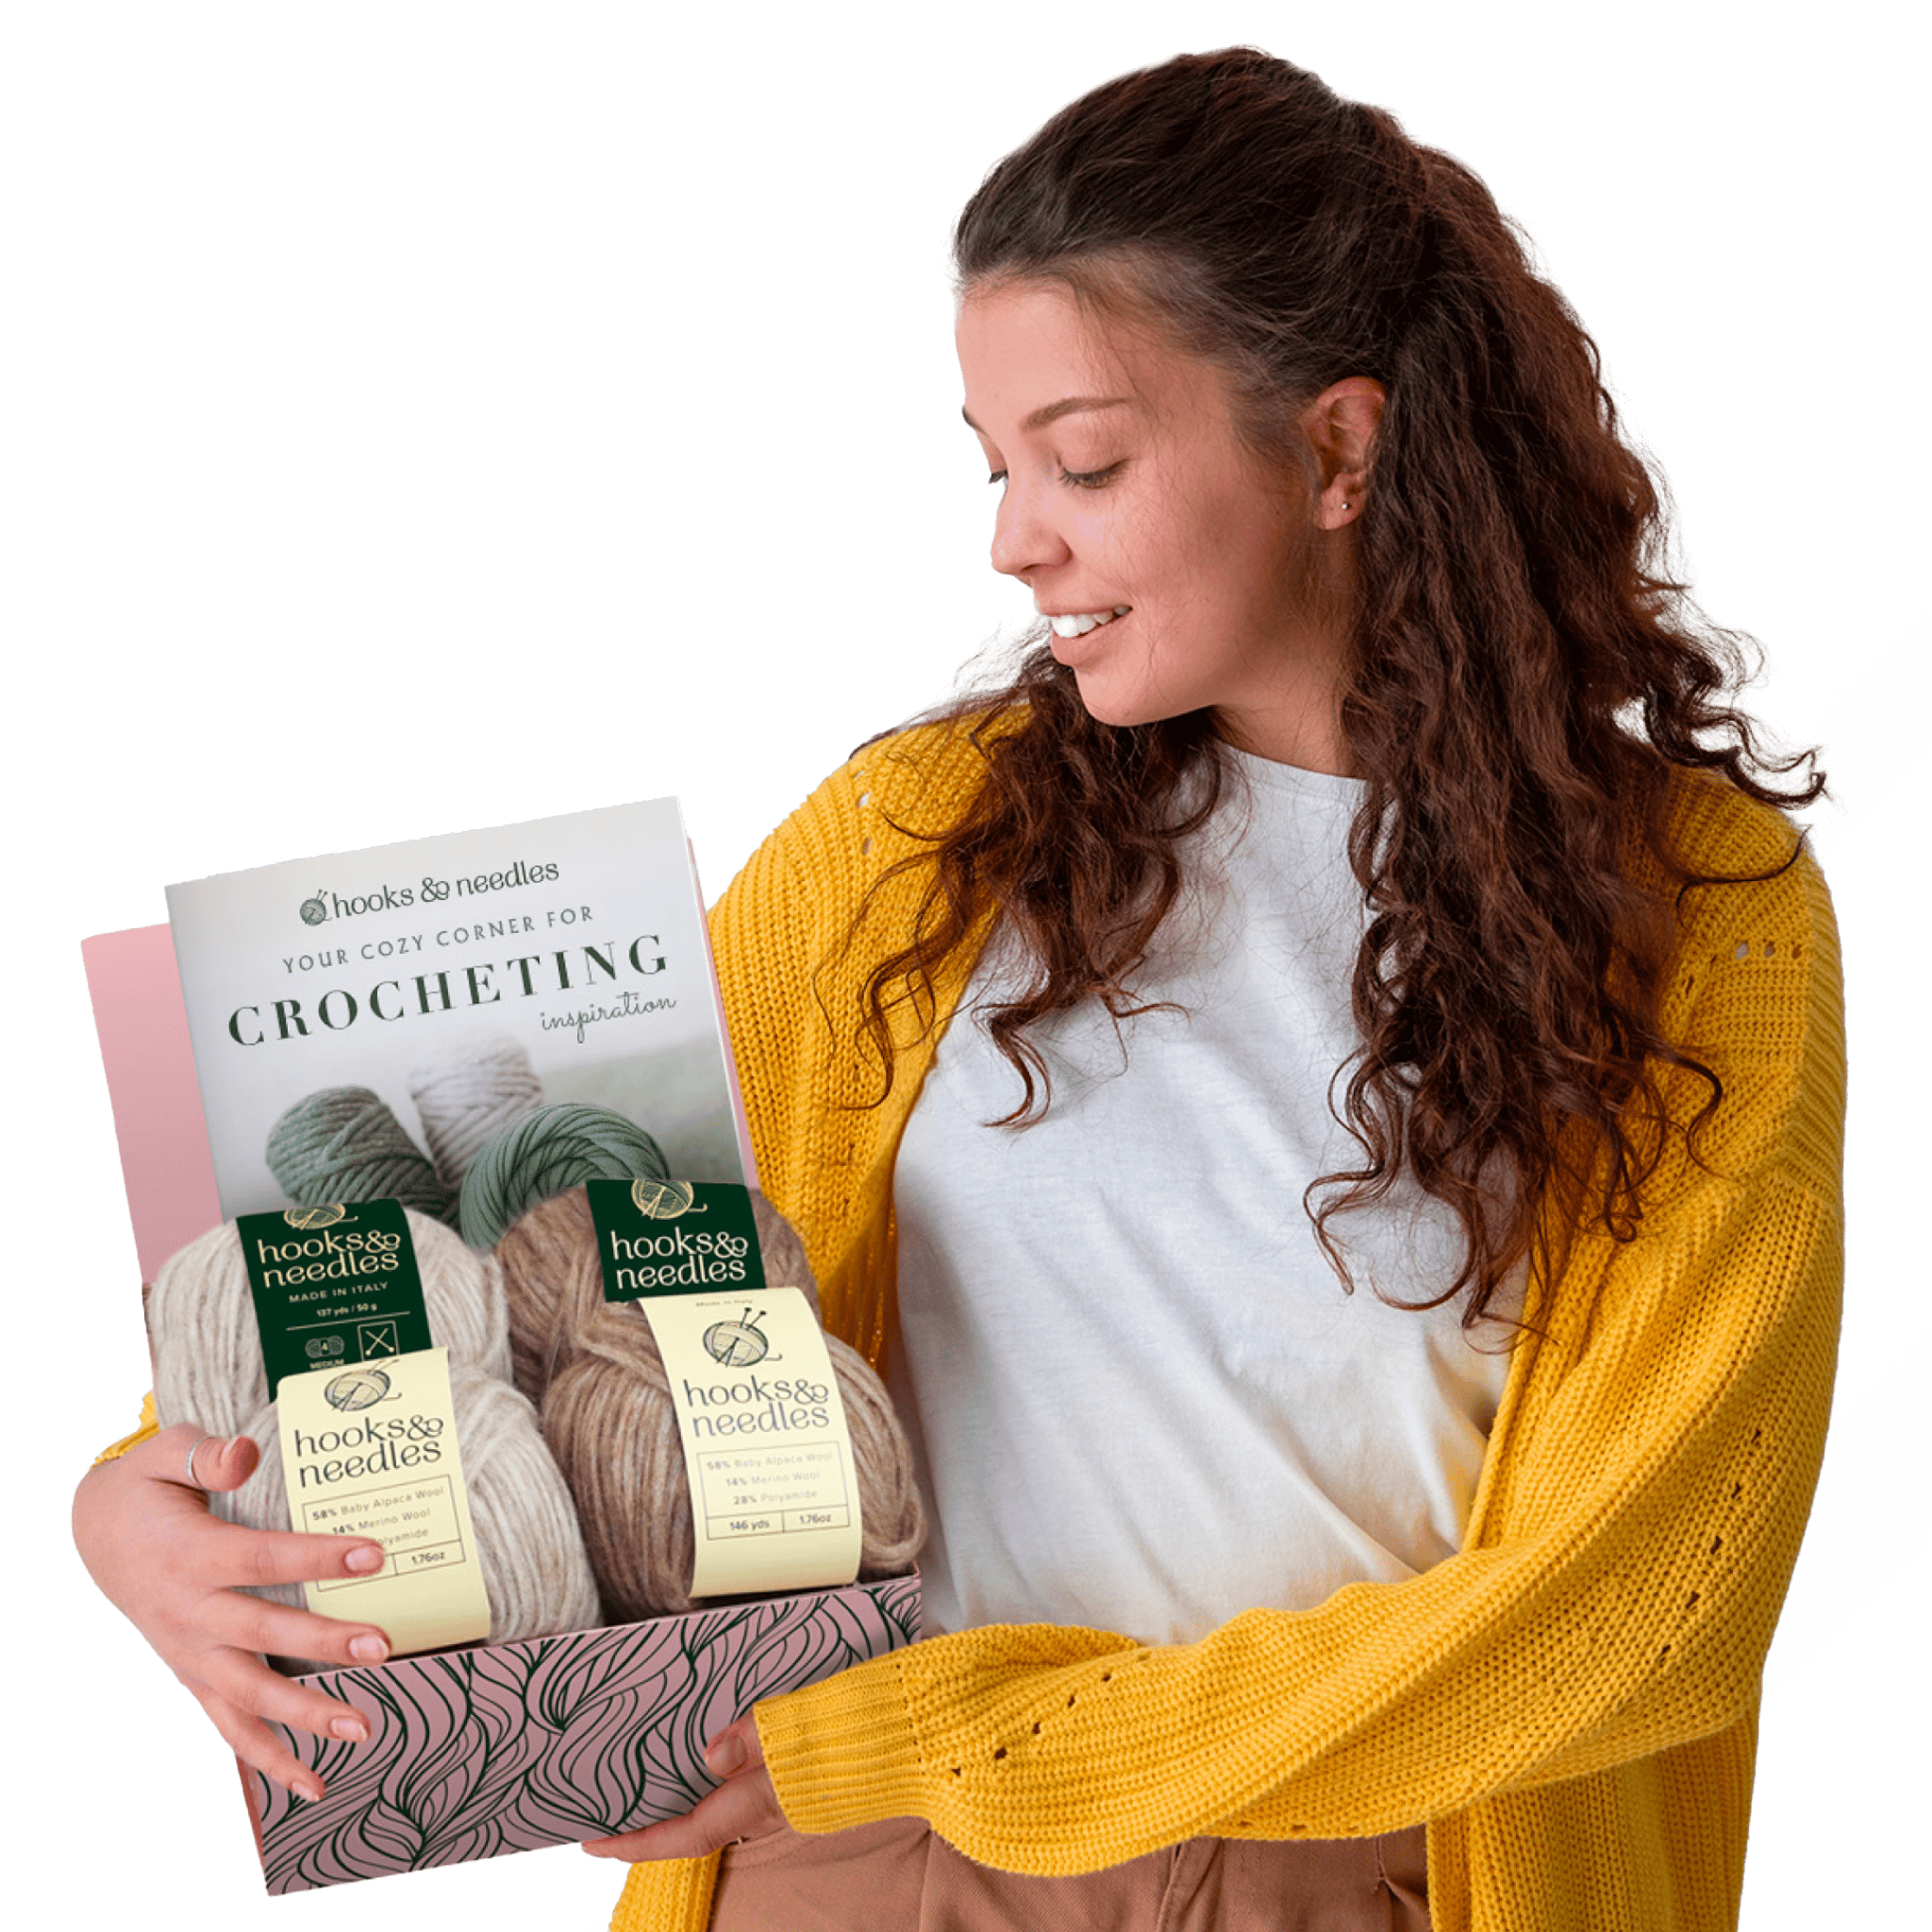 A woman in a yellow cardigan smiling at a [6-Month-Prepaid] Hooks & Needles Subscription Box #14 against a split background of white and soft green.